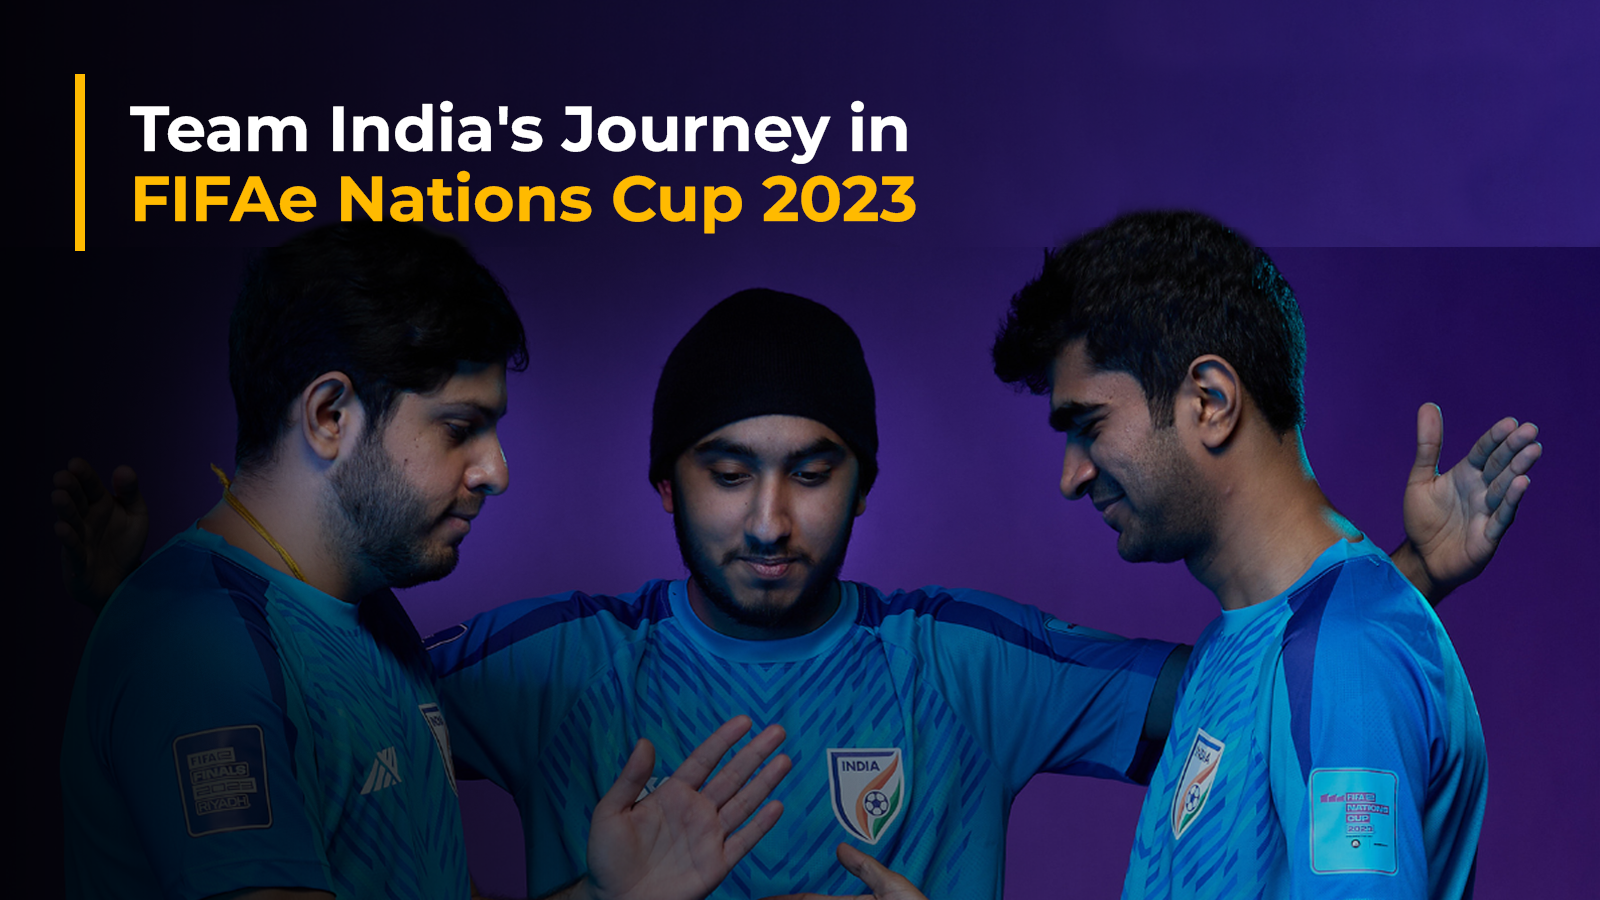 Team India’s Journey in FIFAe Nations Cup 2023: A Display of Resilience and Grit